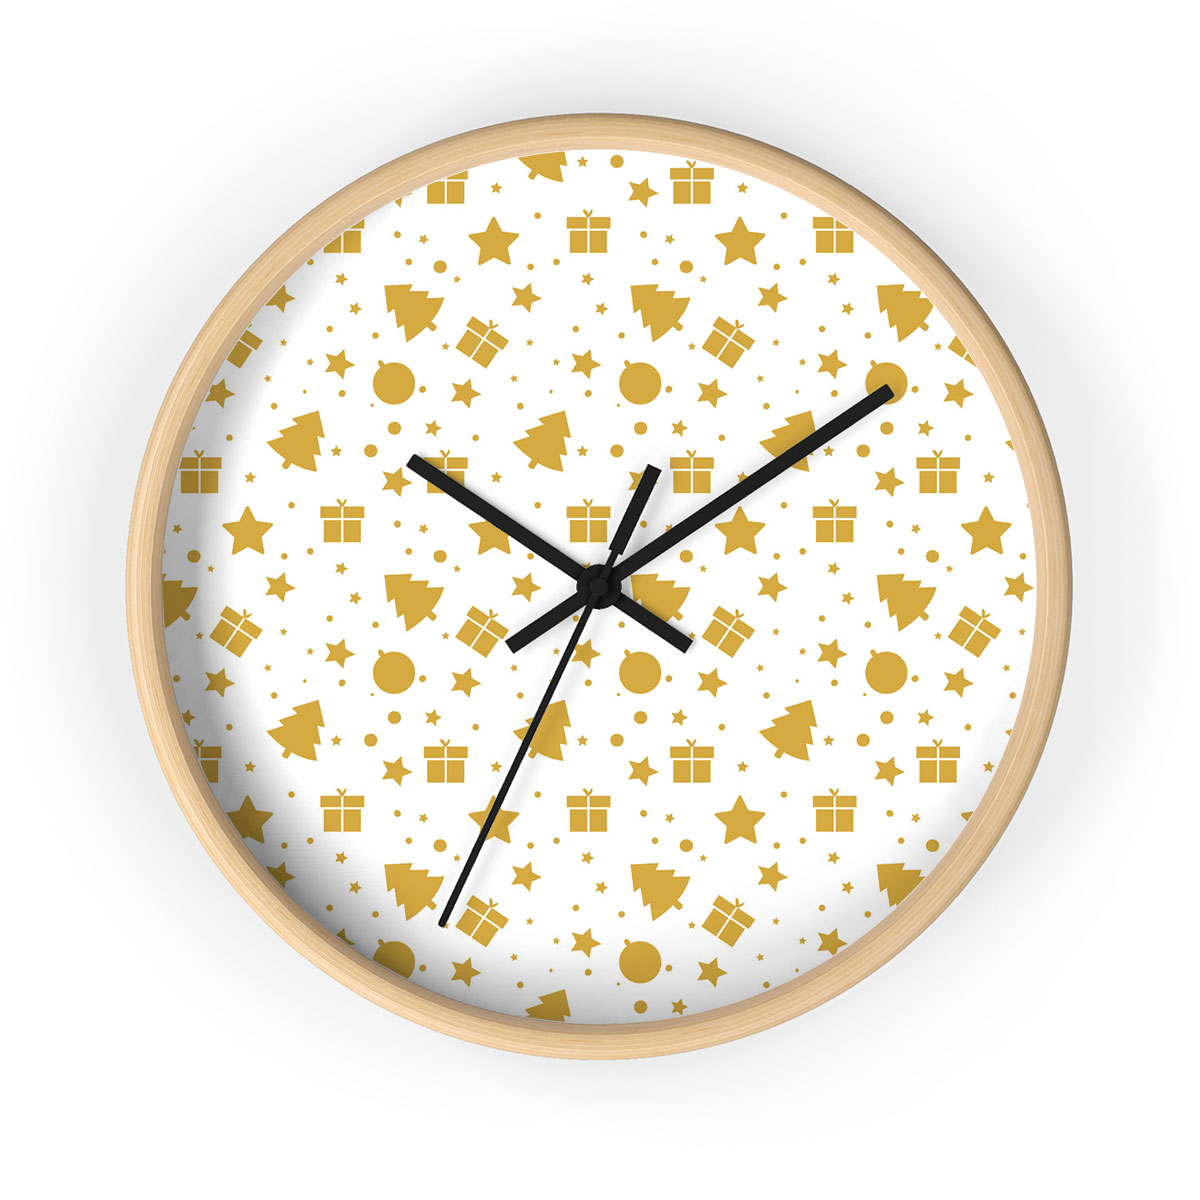 Christmas Gifts, Baudles And Pine Tree Silhouette Filled In Gold Color Pattern Printed Wooden Wall Clock